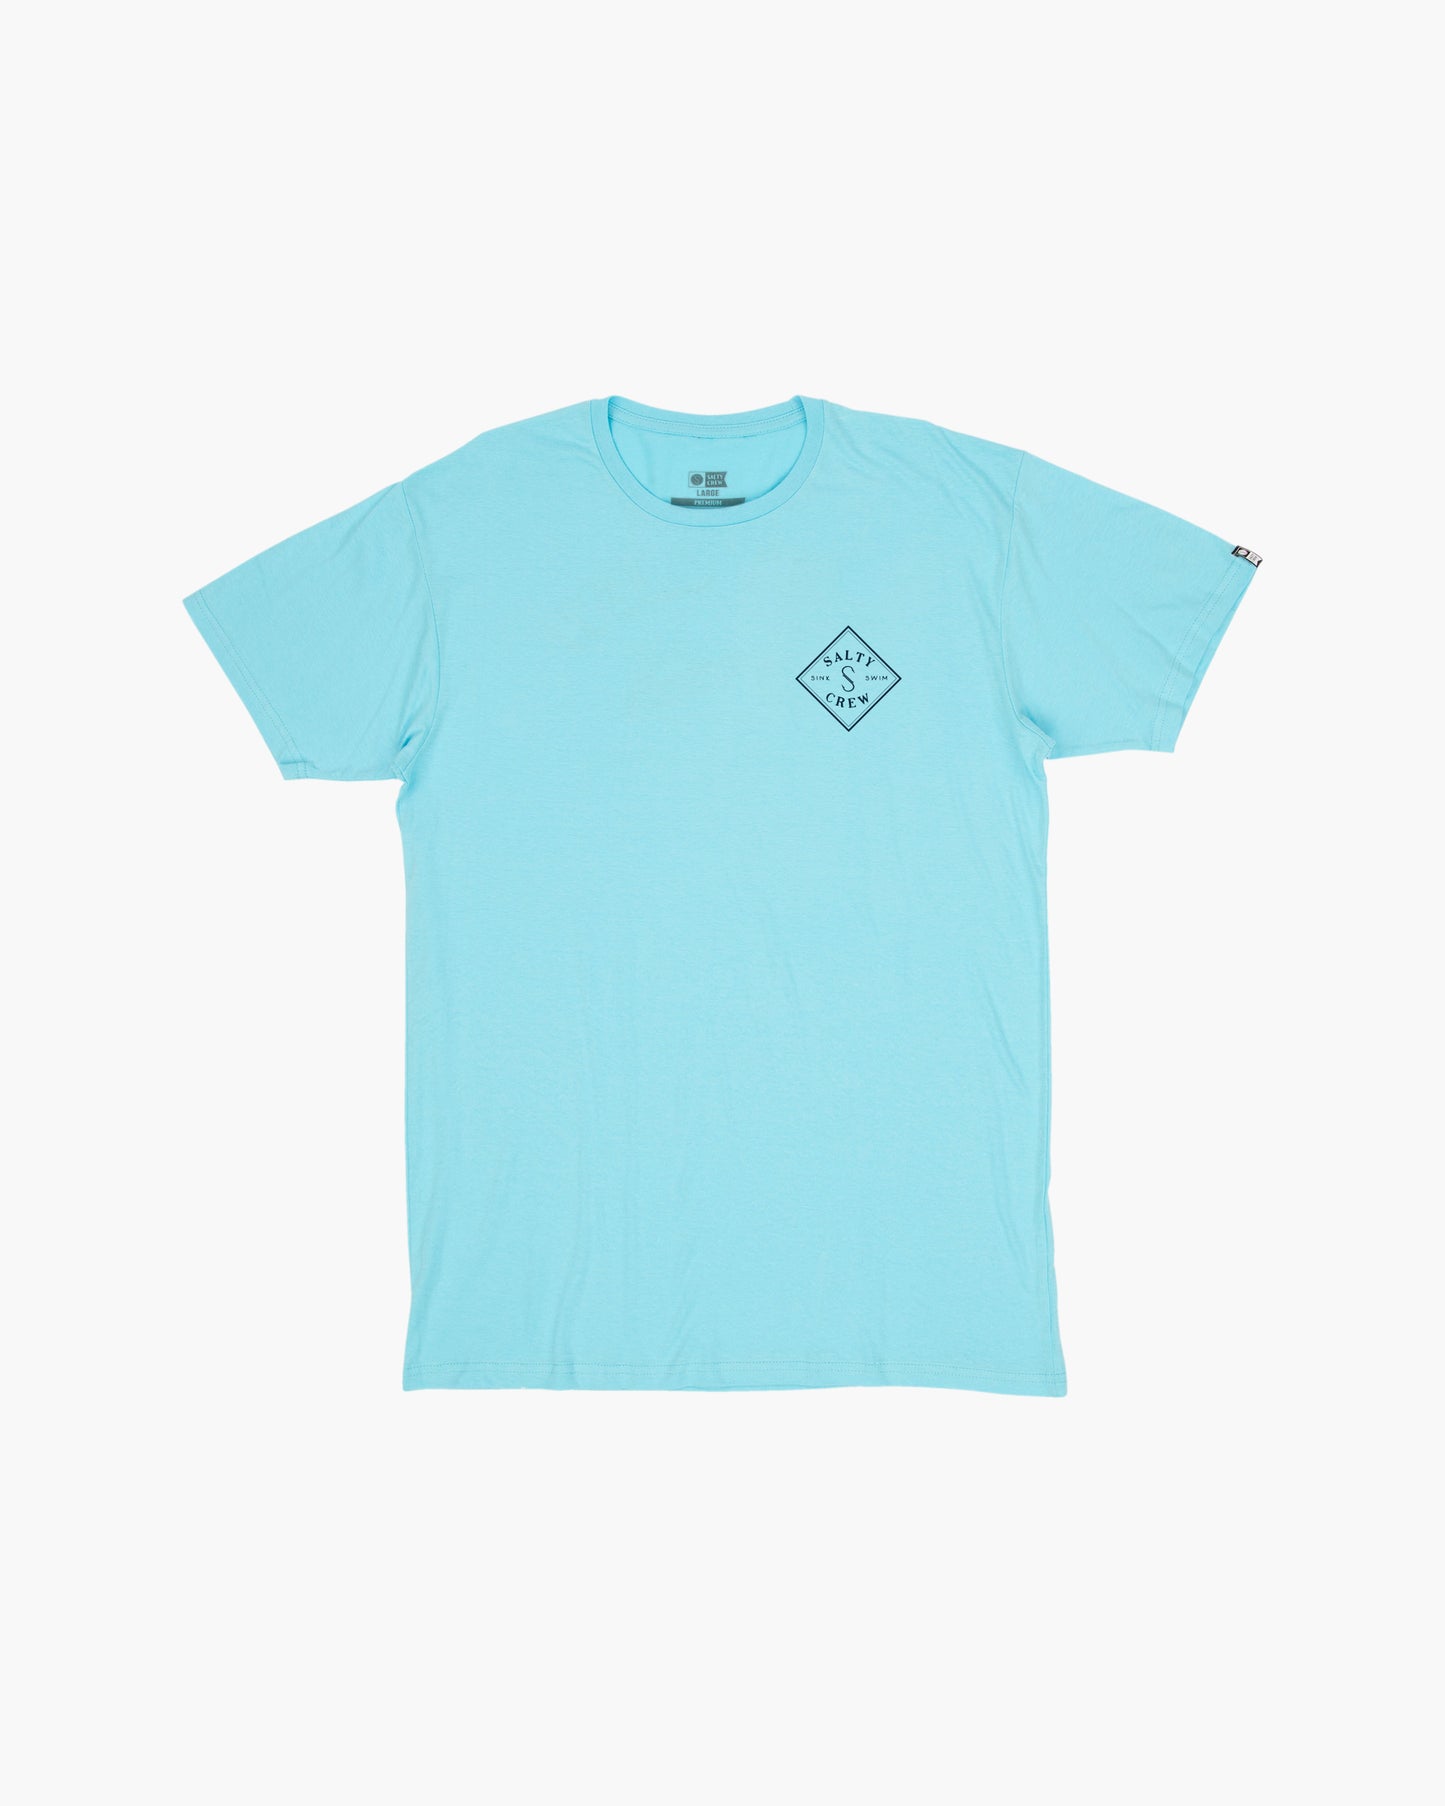 Off body front of Tippet Pacific Blue Premium S/S Tee